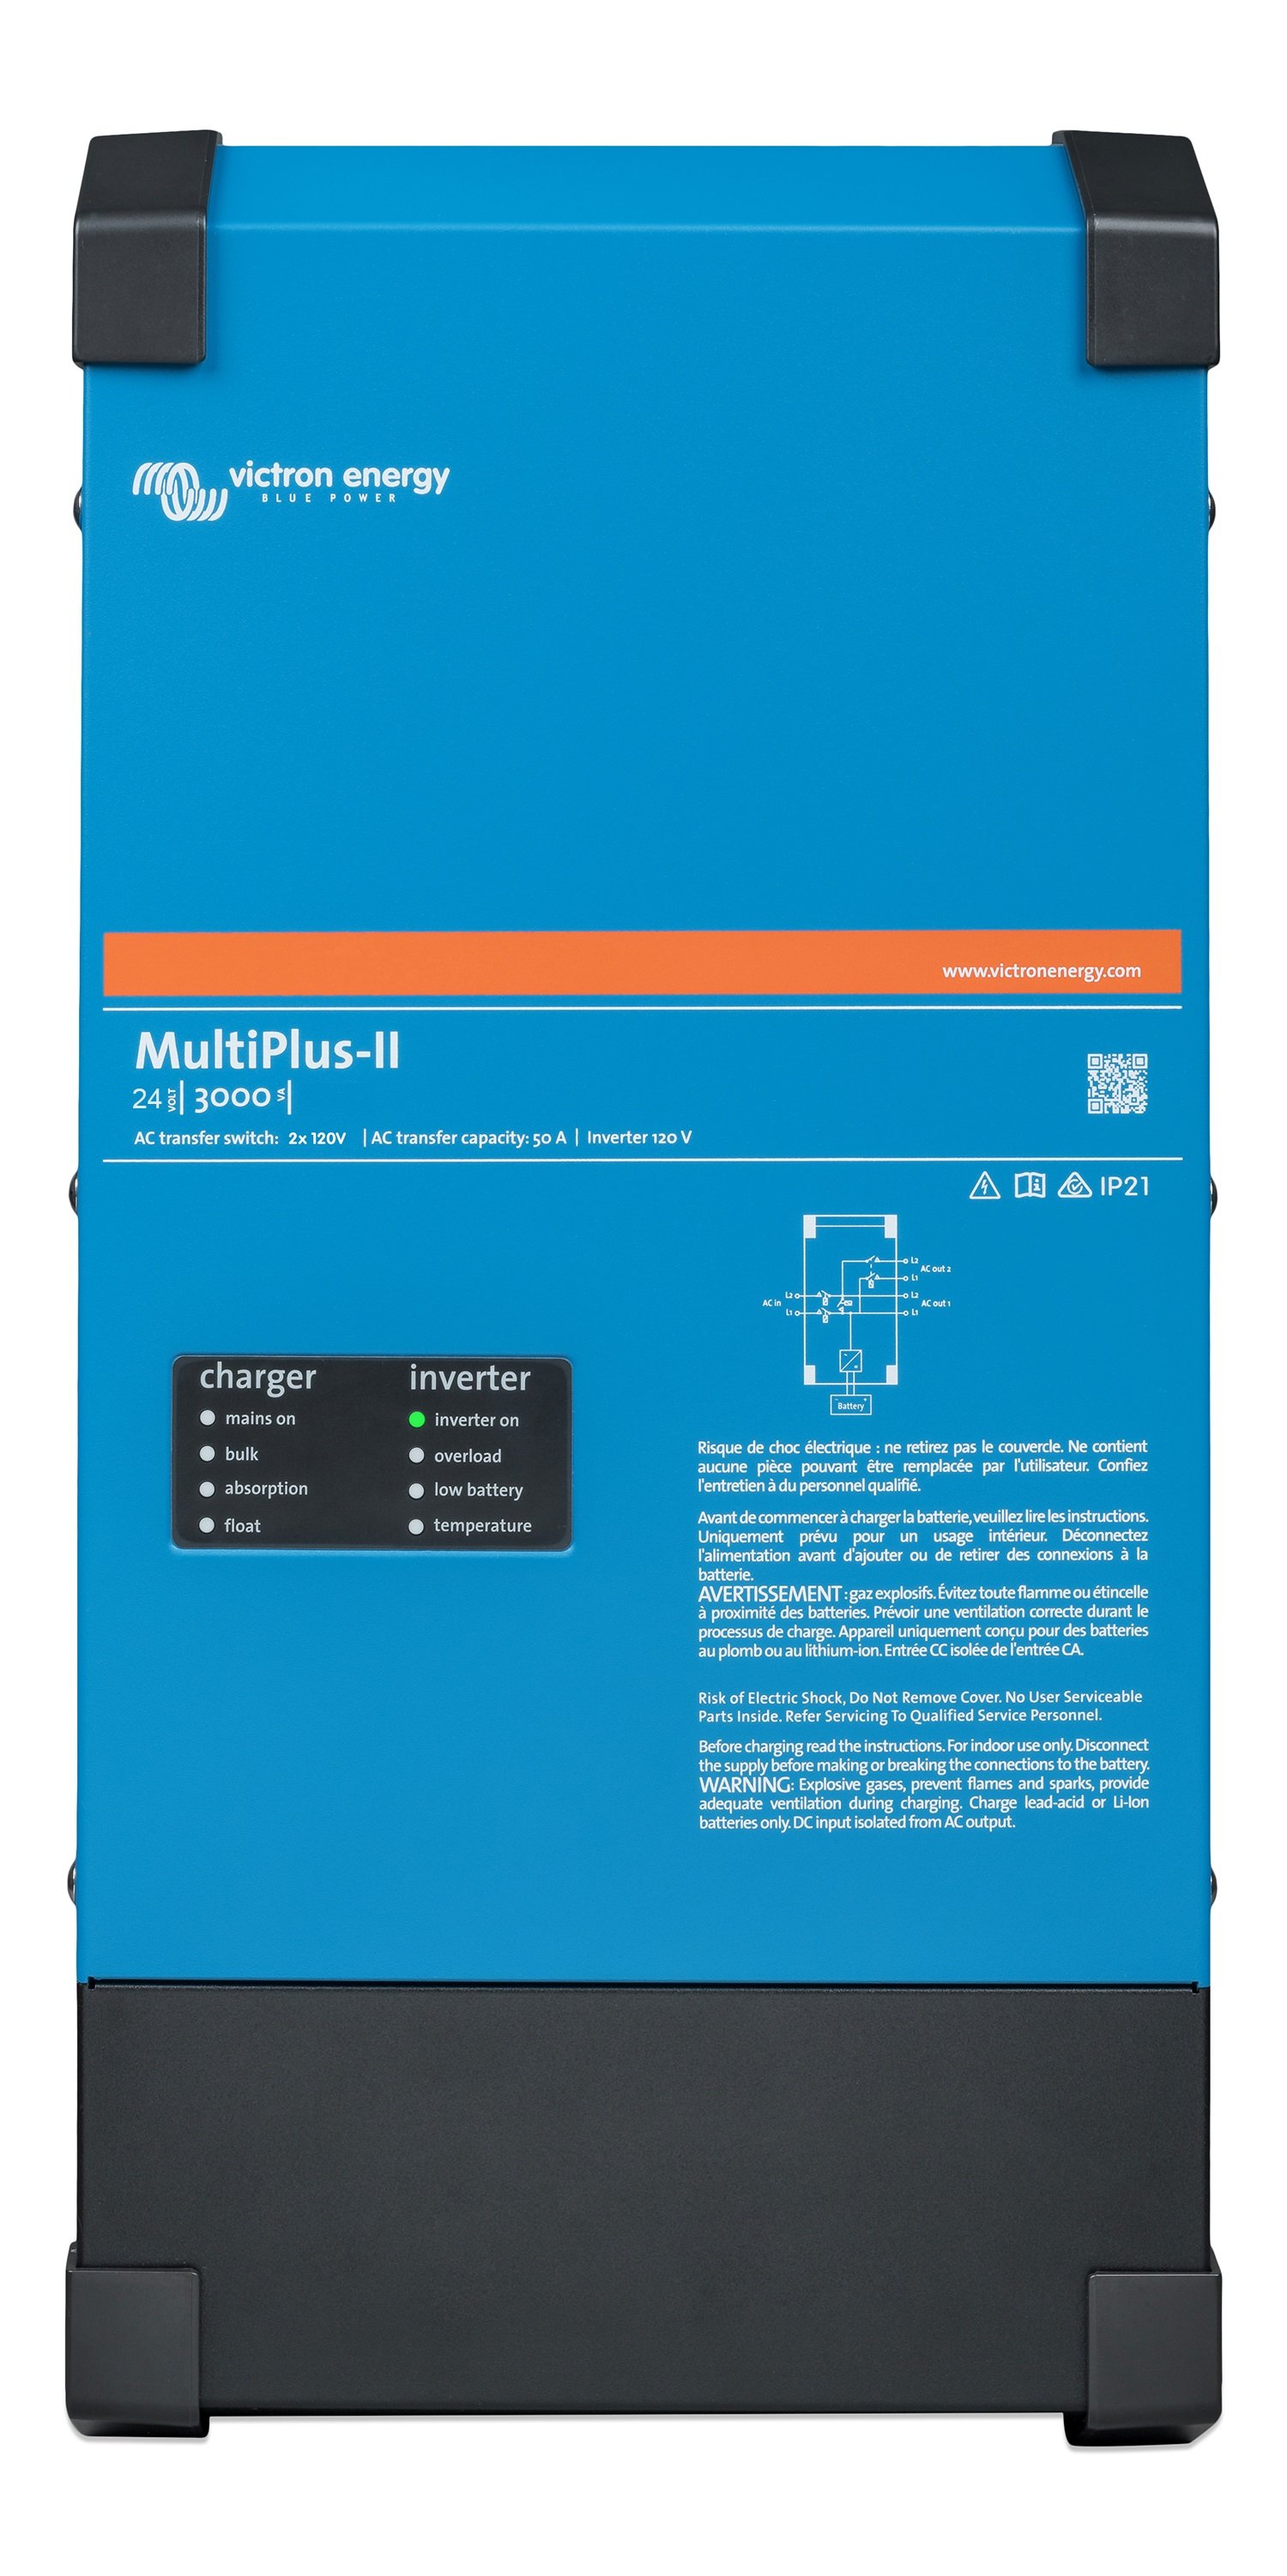 Is the Multiplus II 2x120V a suitable inverter charger for marine use?